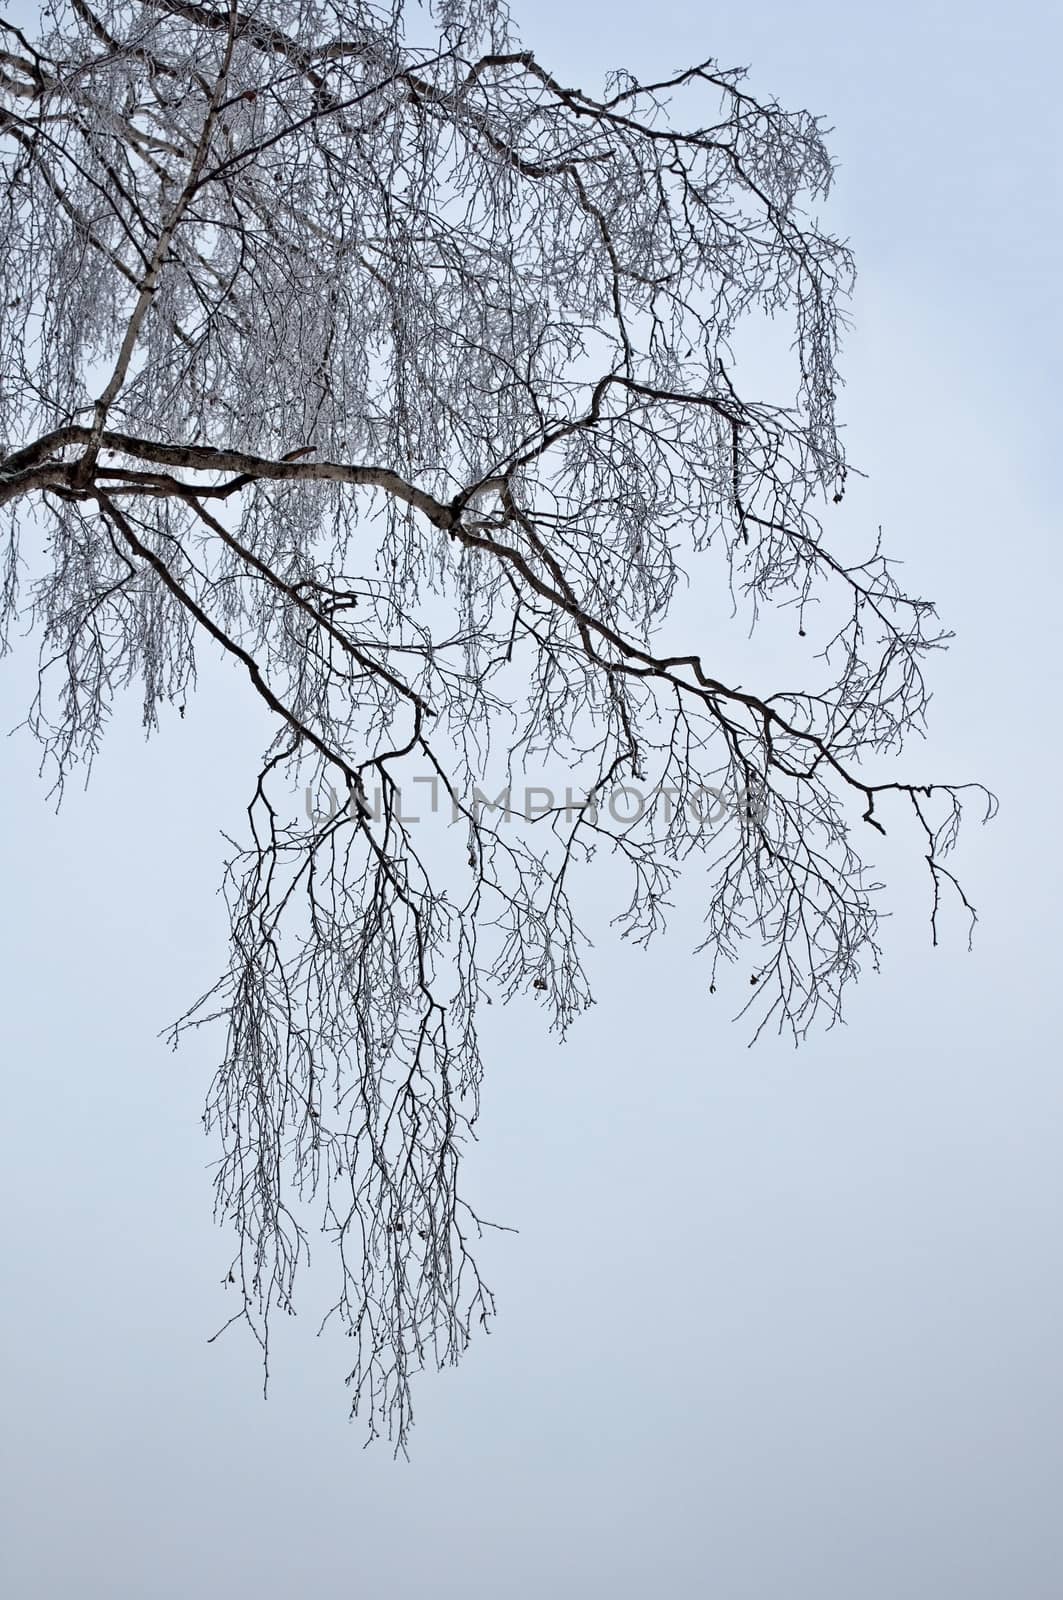 Bare branches of birch against the gray sky, cloudy winter day